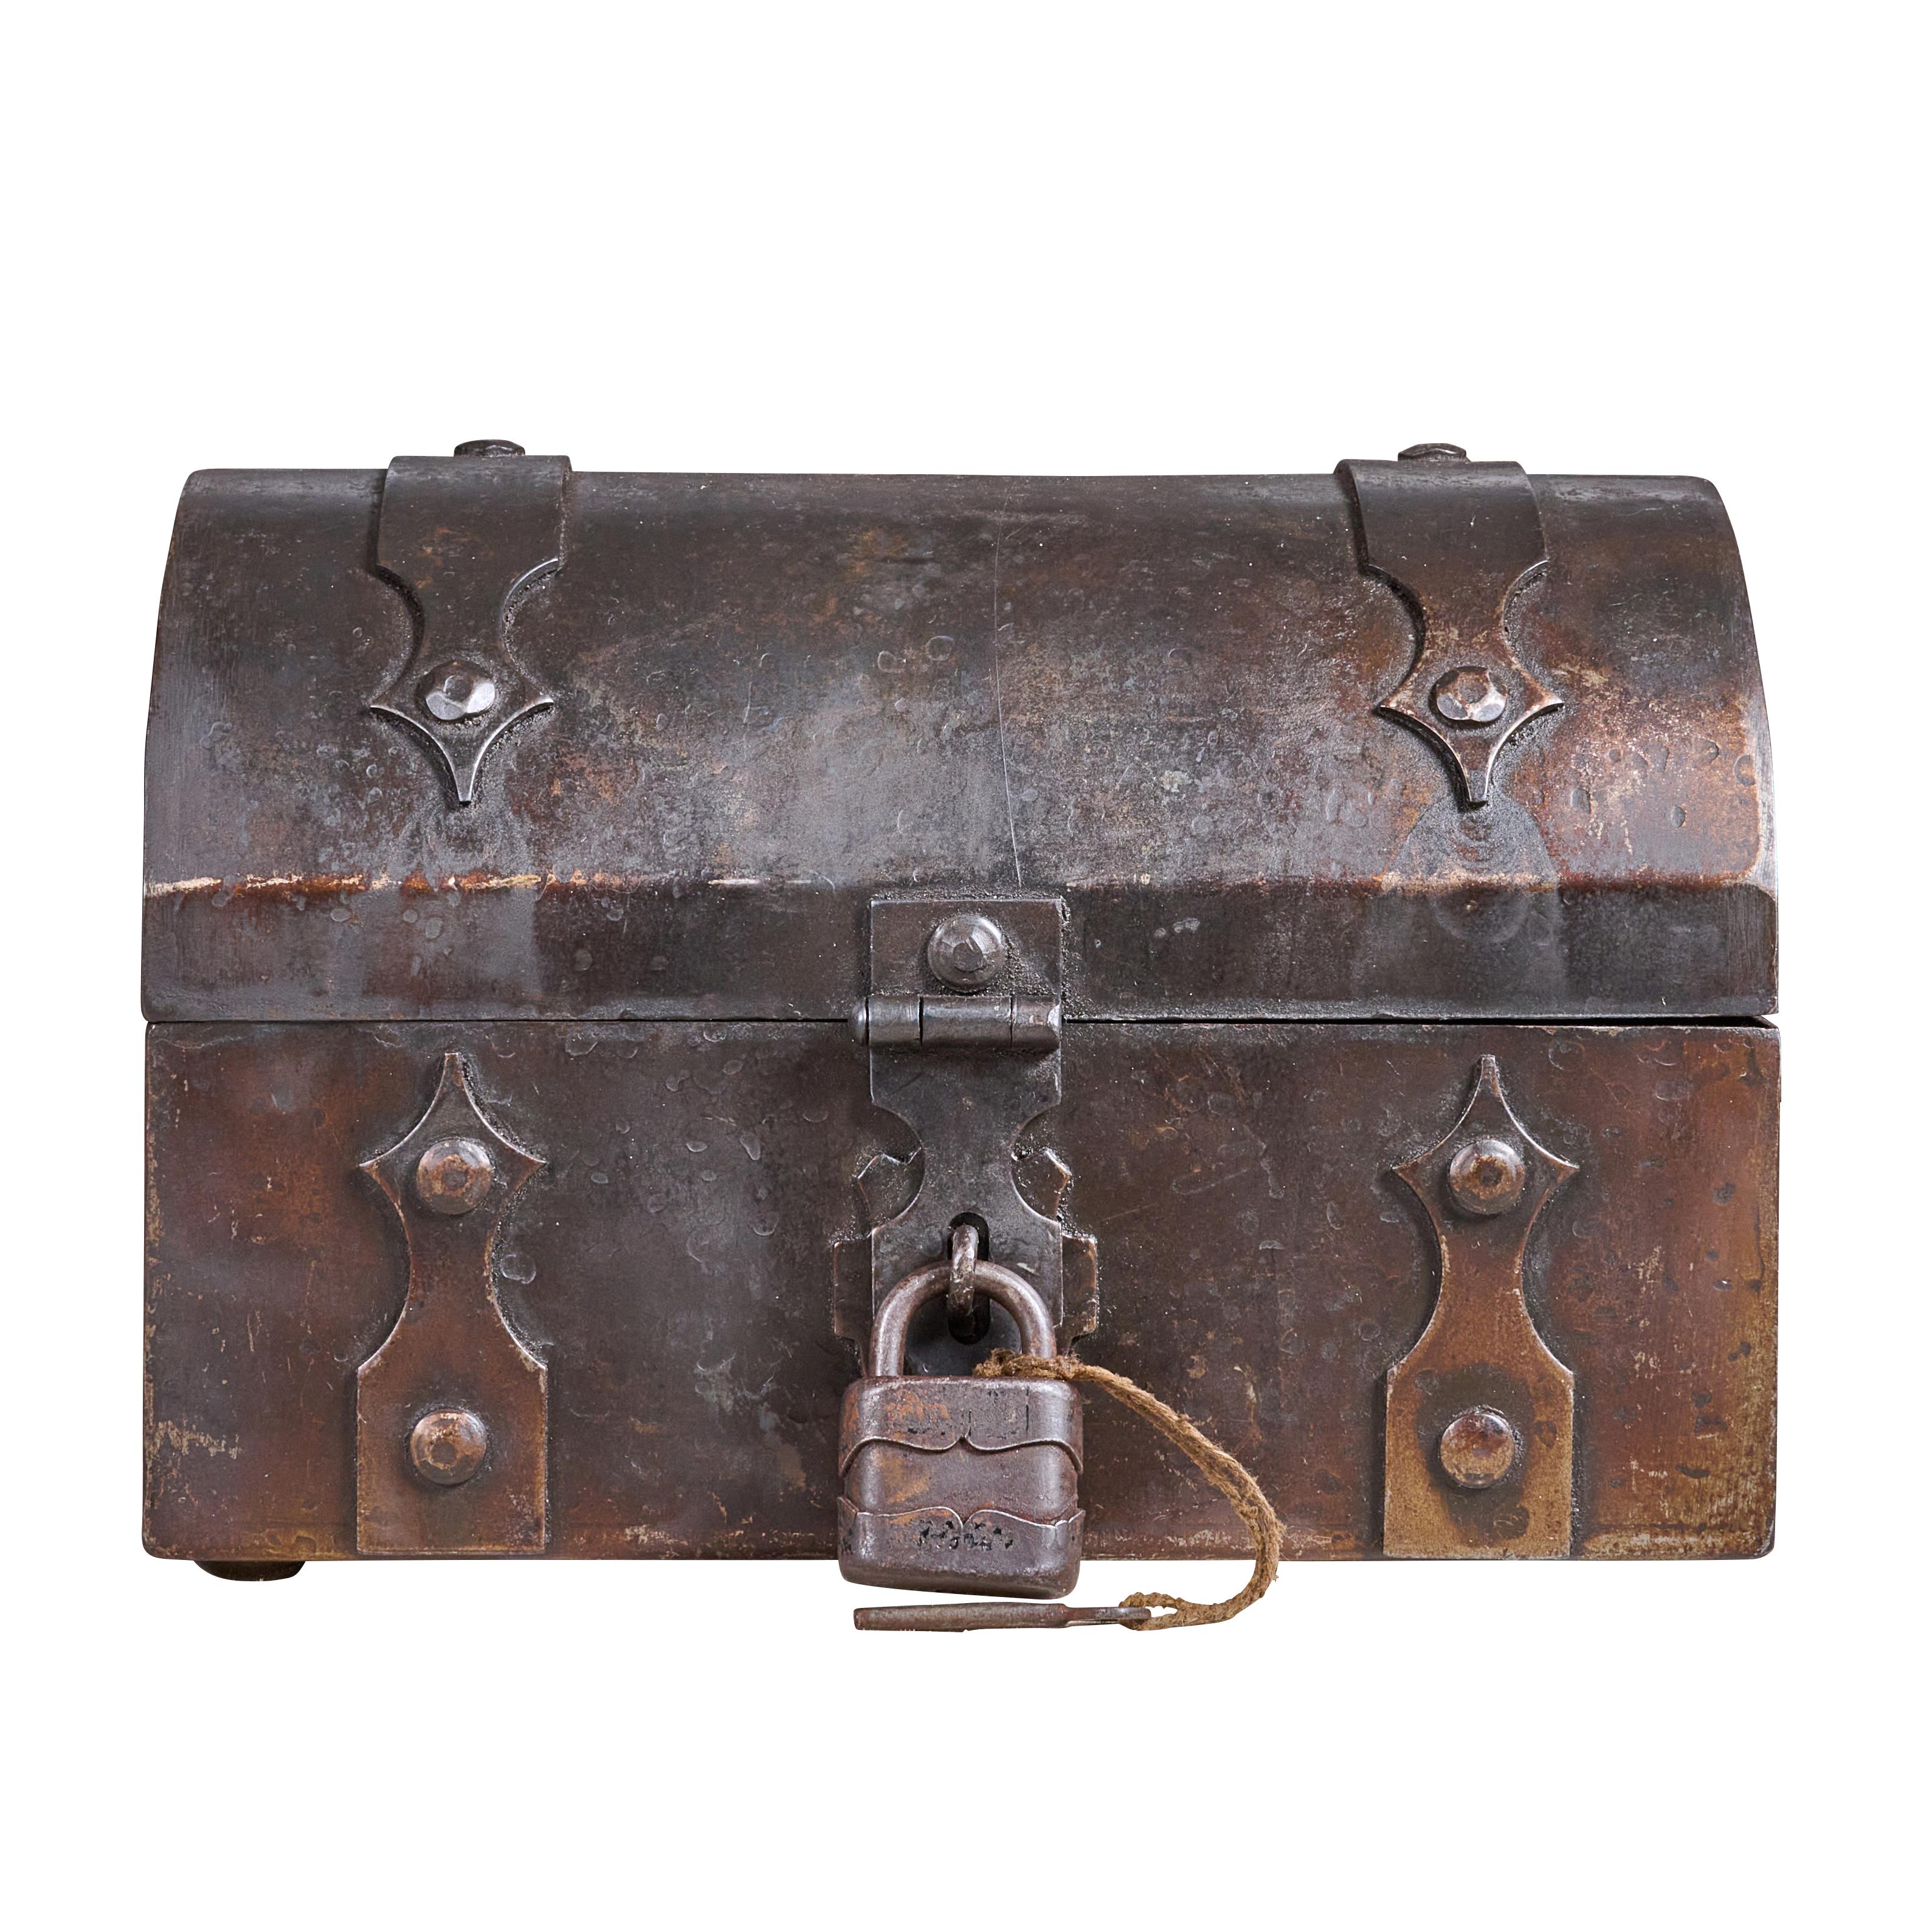 Very nice wrought iron lock box with lock and key. Great quality.

 